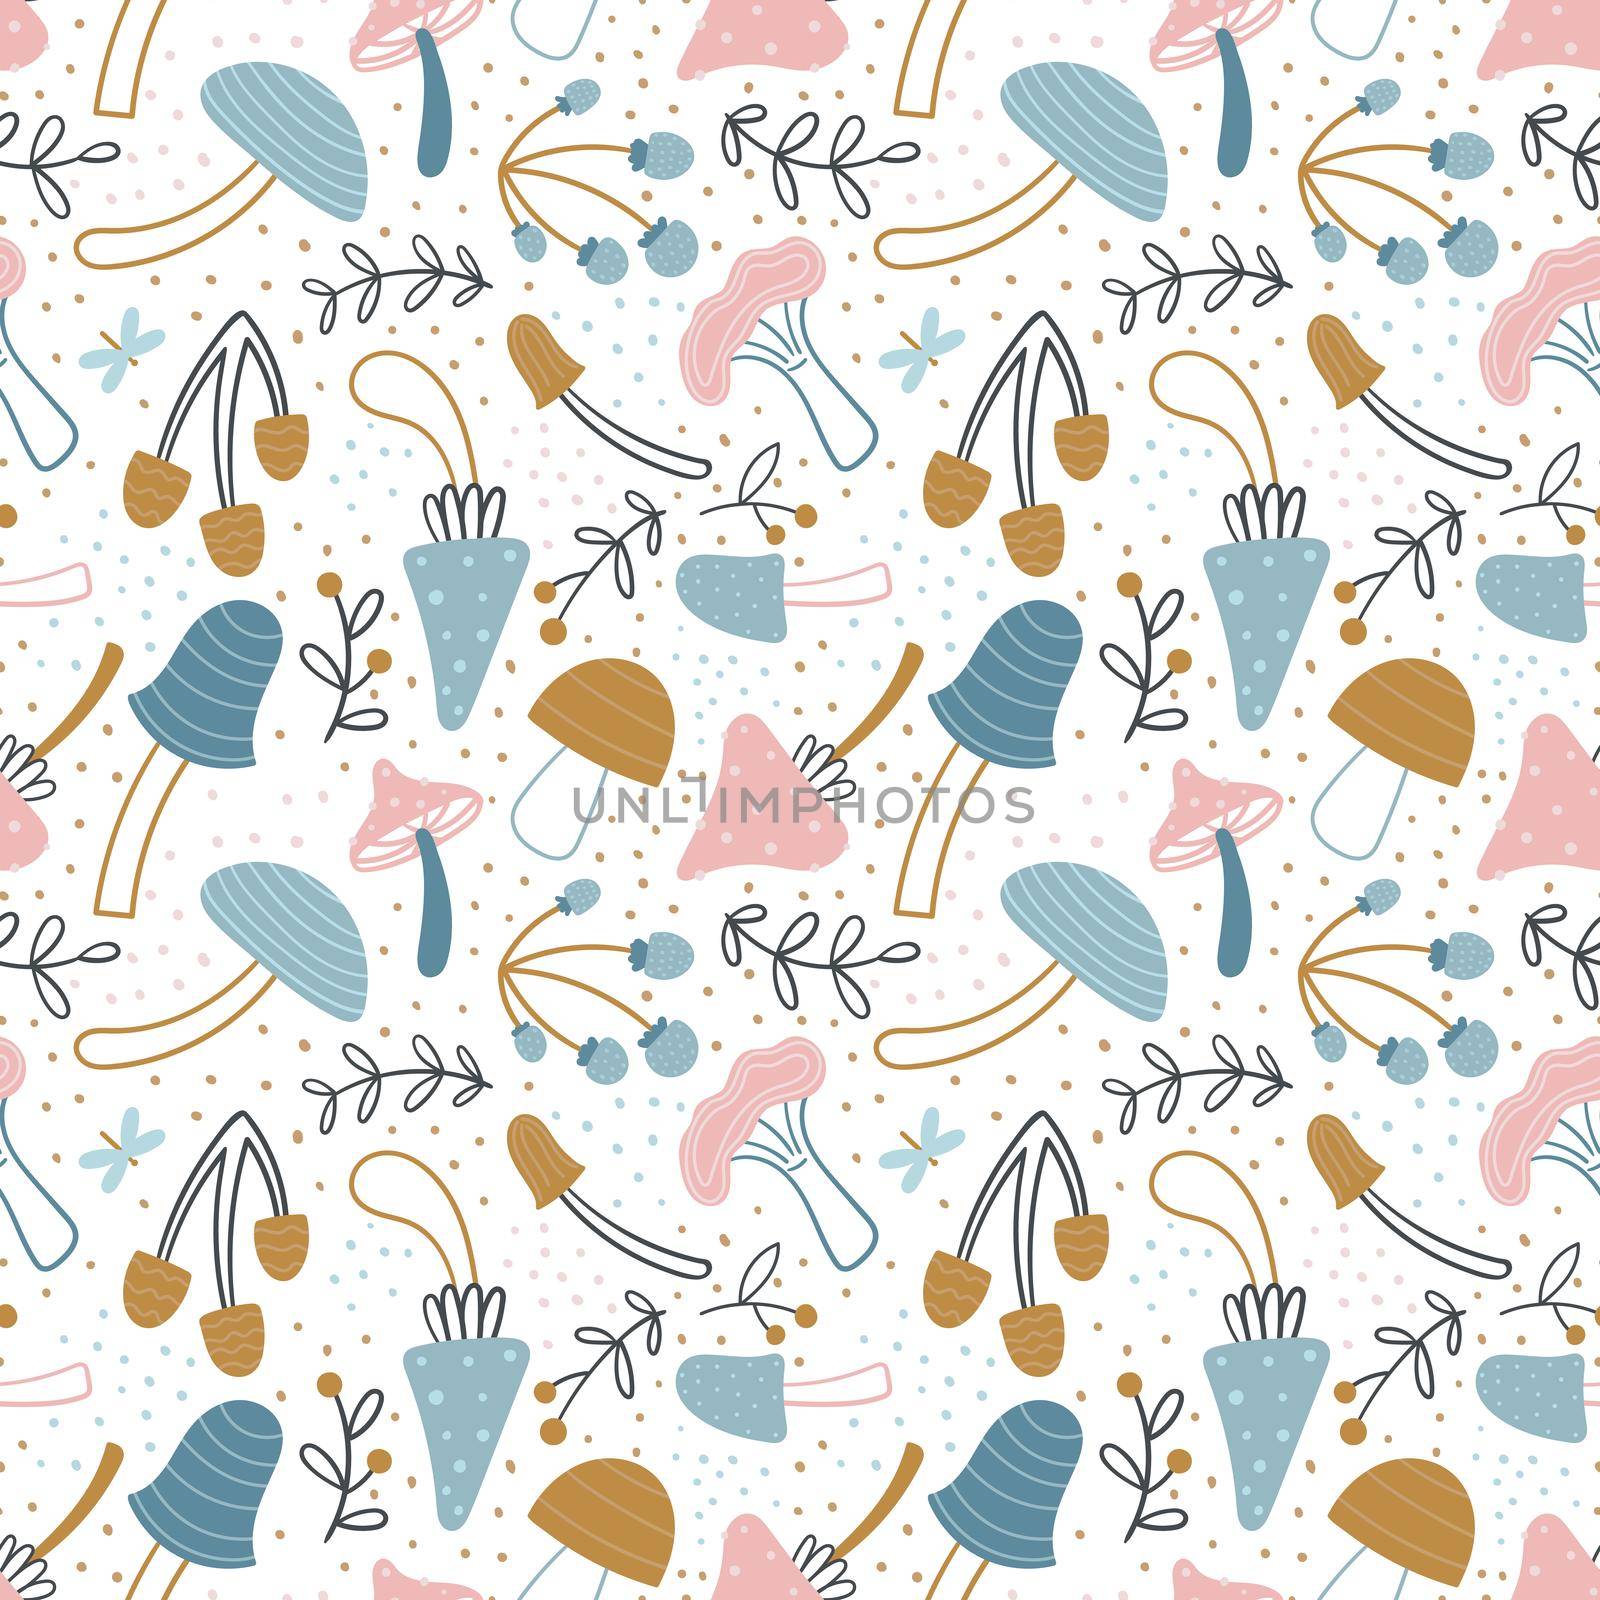 Mushrooms seamless pattern. Cute mushrooms in doodle style on a white background. Pastel palette. Autumn design for fabric, textile, etc. by Lena_Khmelniuk